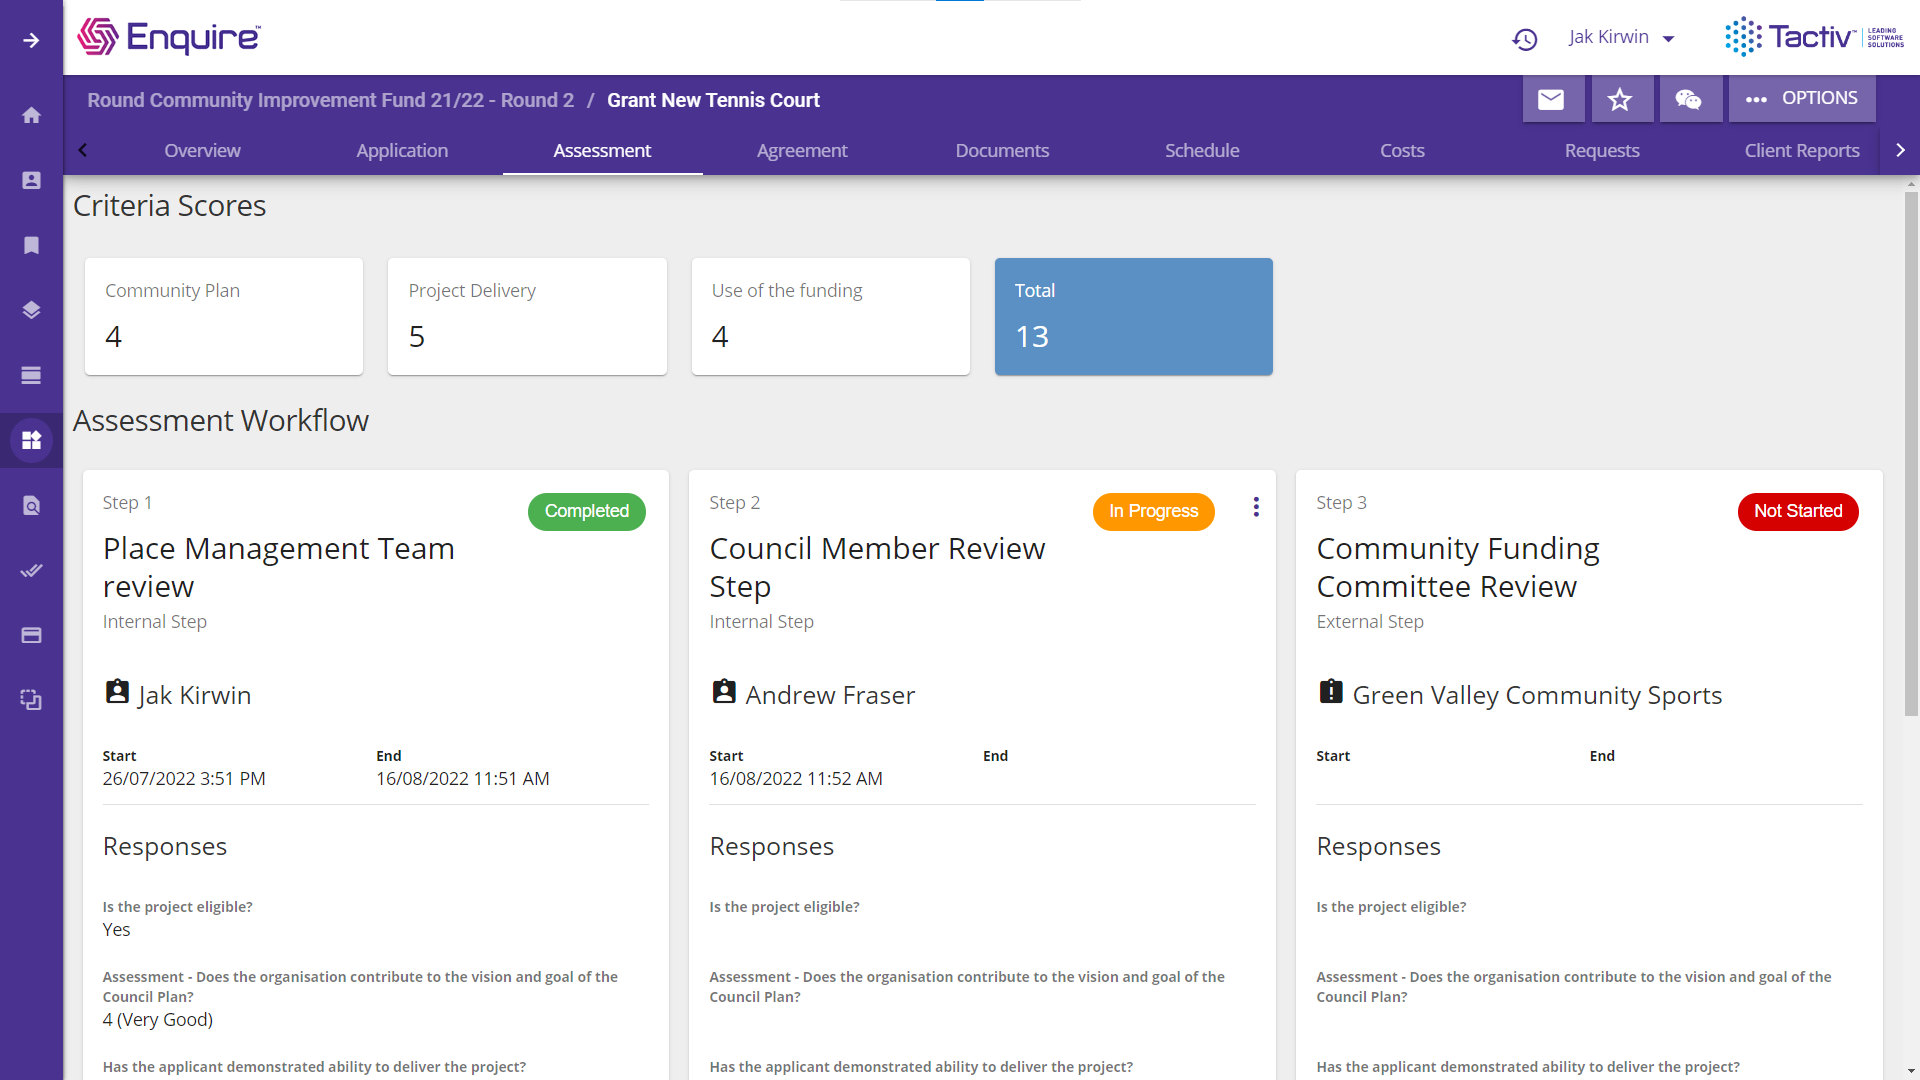 Enquire user interface showcasing external grant assessors completing tasks